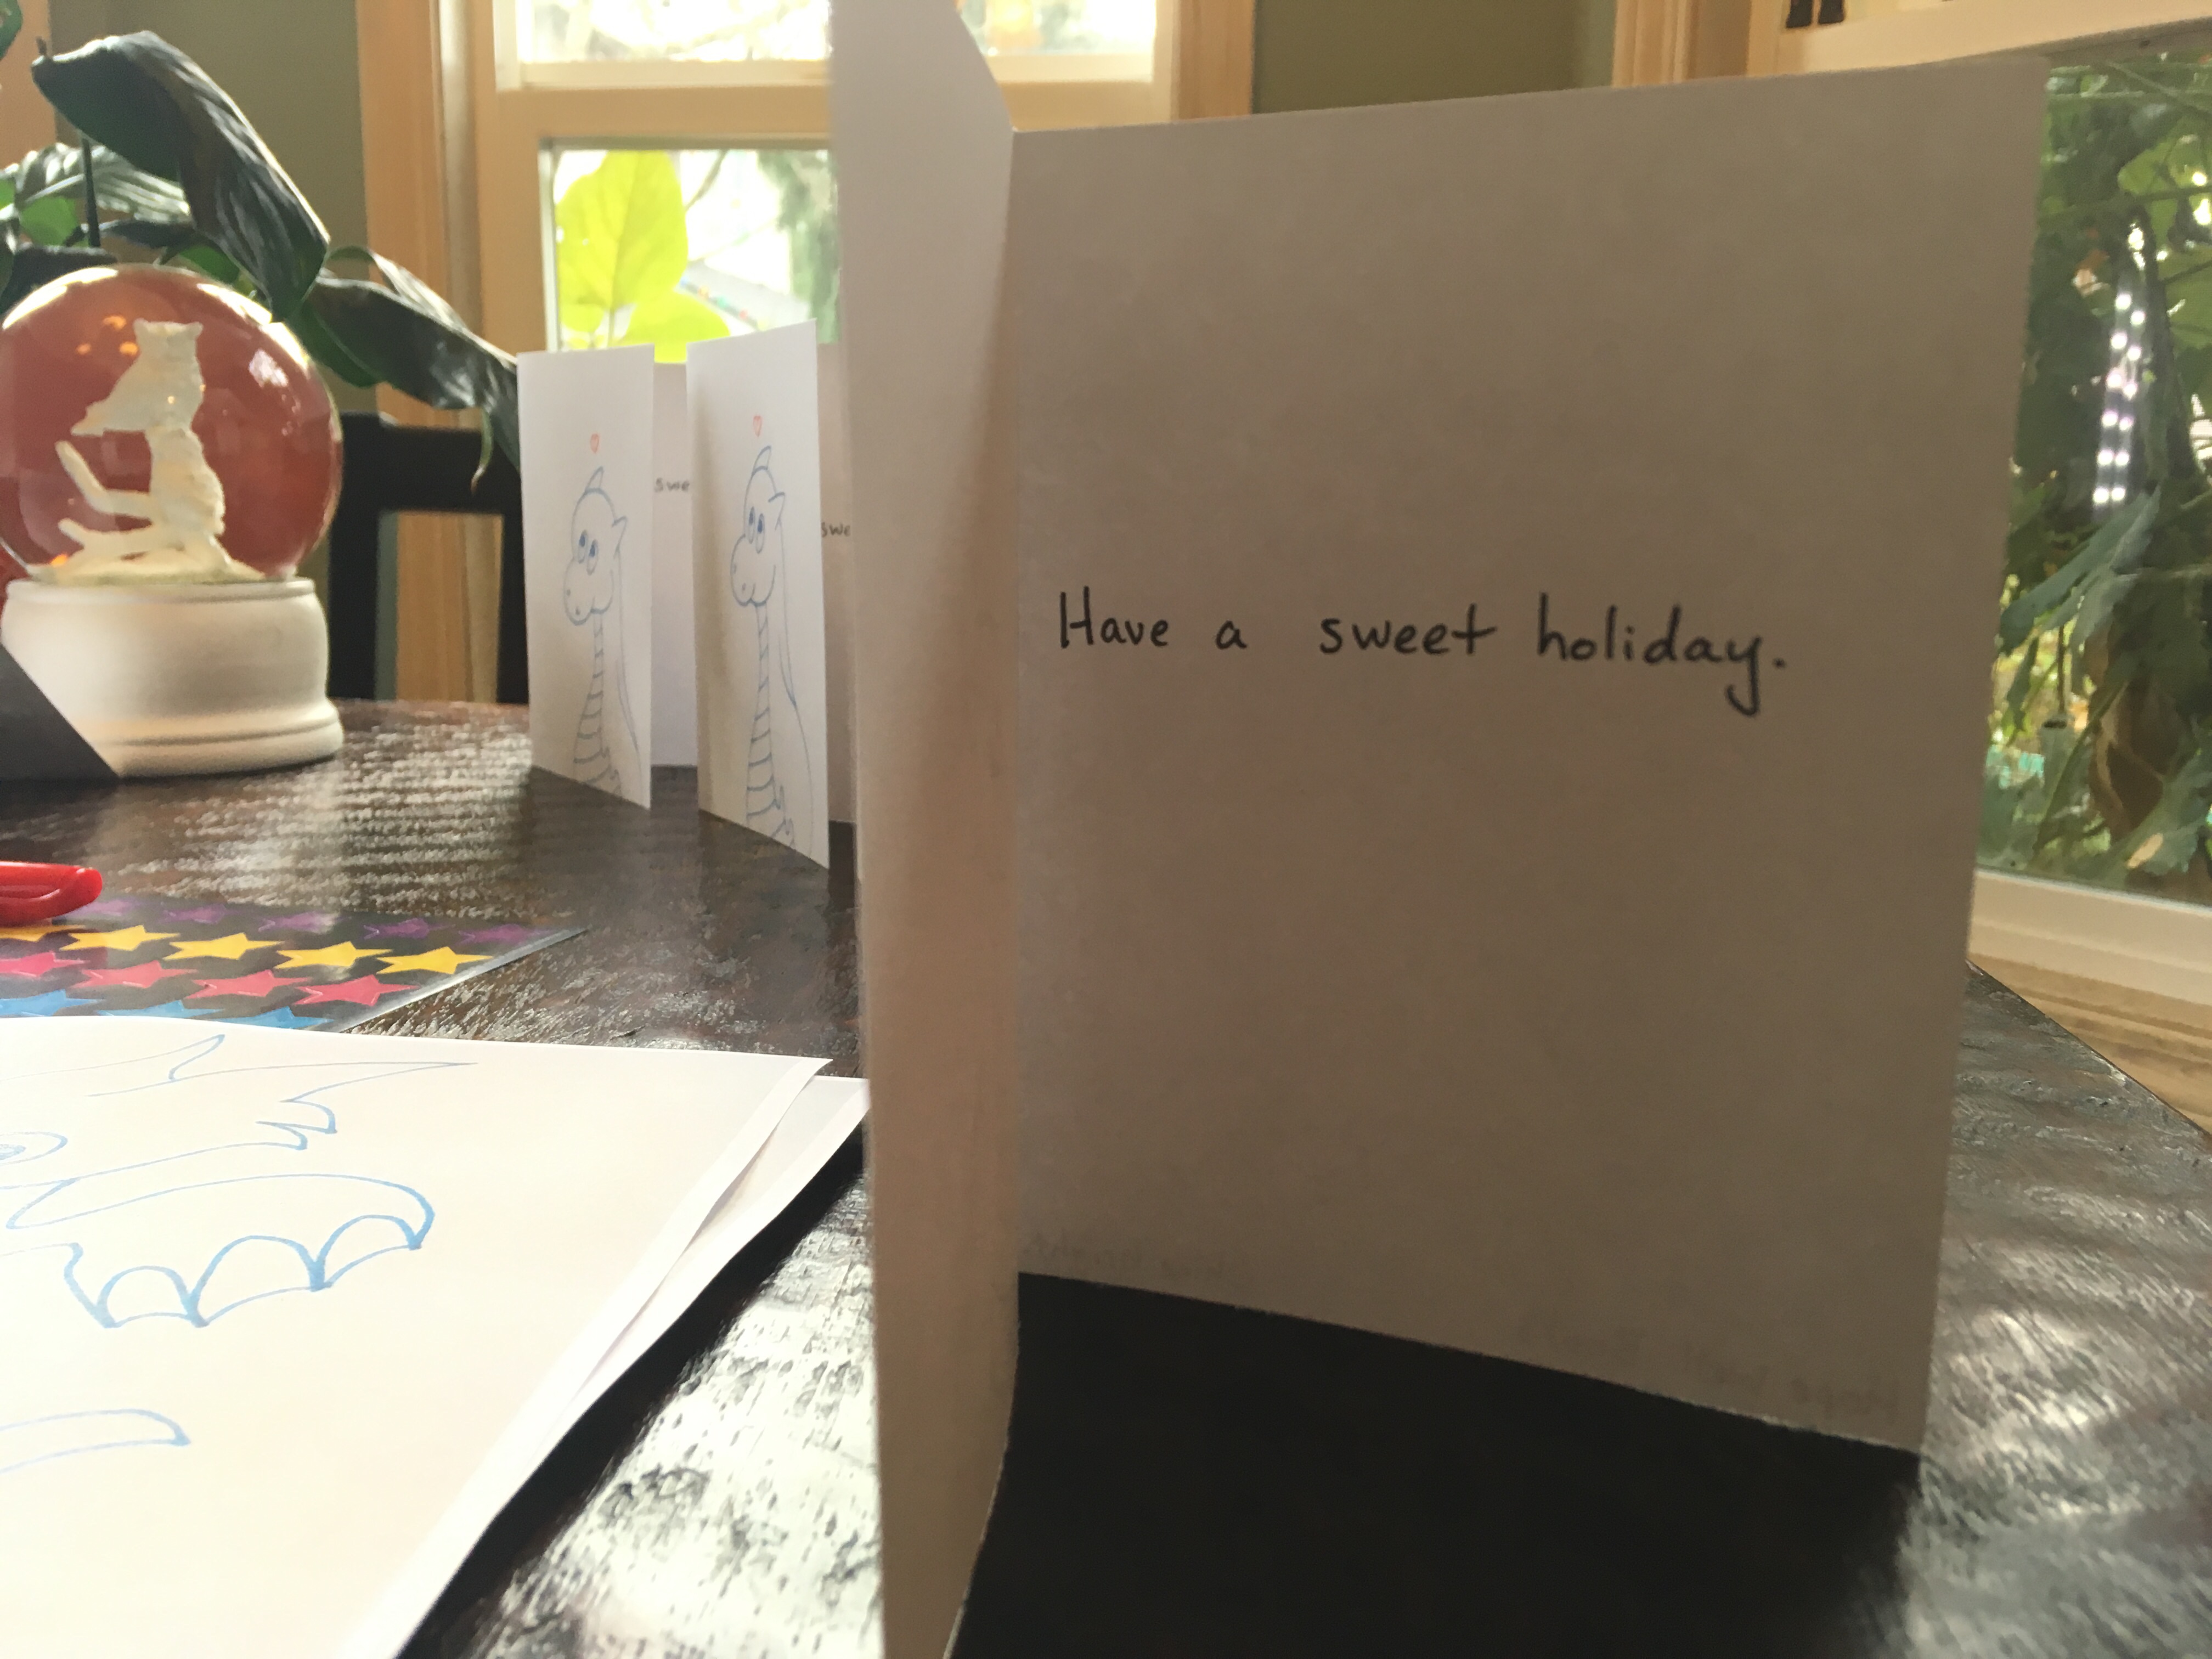 Inside of white card says have a sweet holiday